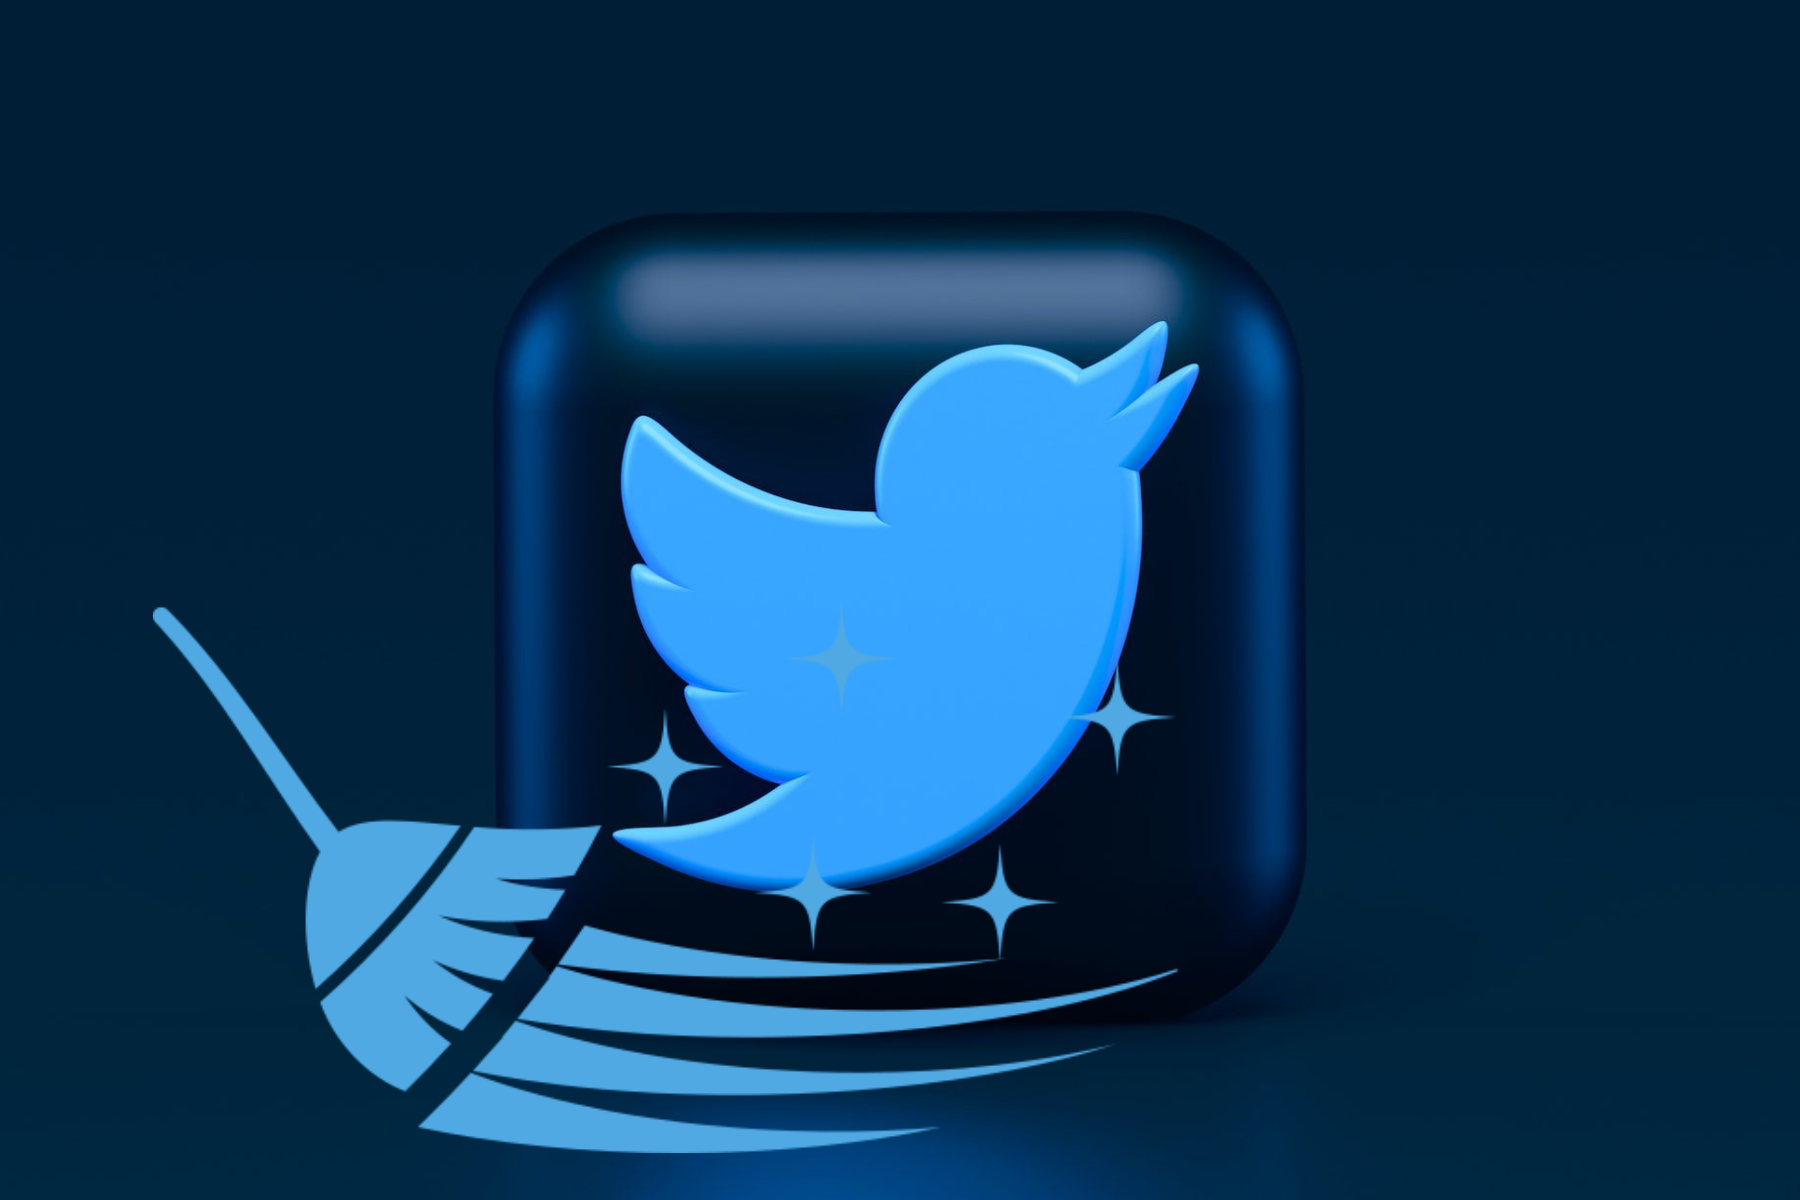 Twitter 3D logo with a blue broom